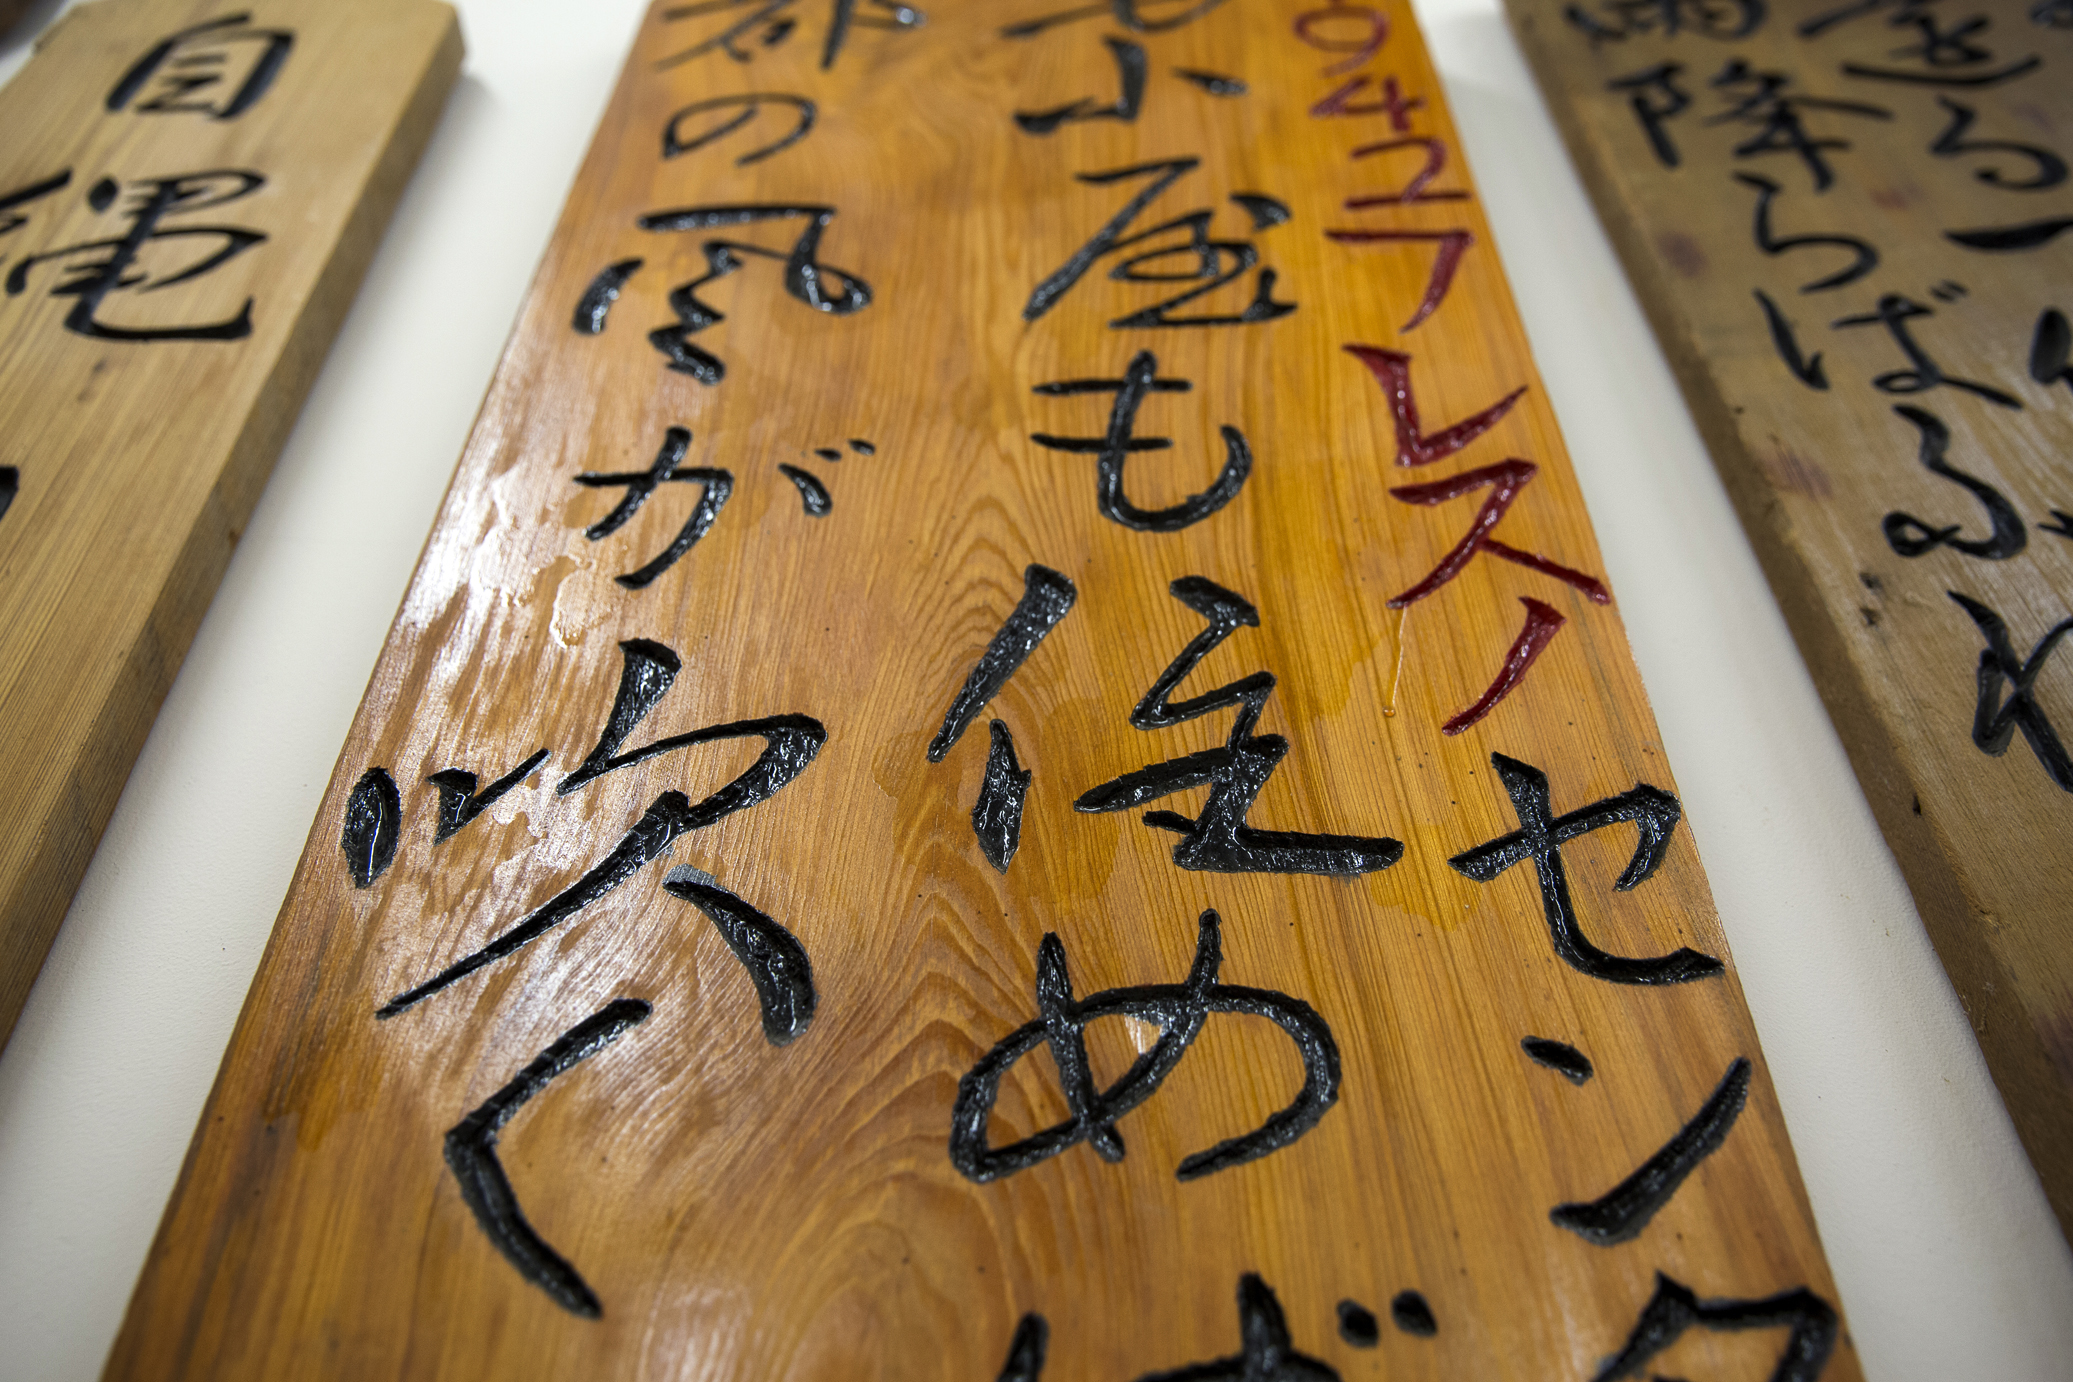 James Imahara, later in life, developed the art of haiku carvings and spent much of his free time putting poetry to wood.